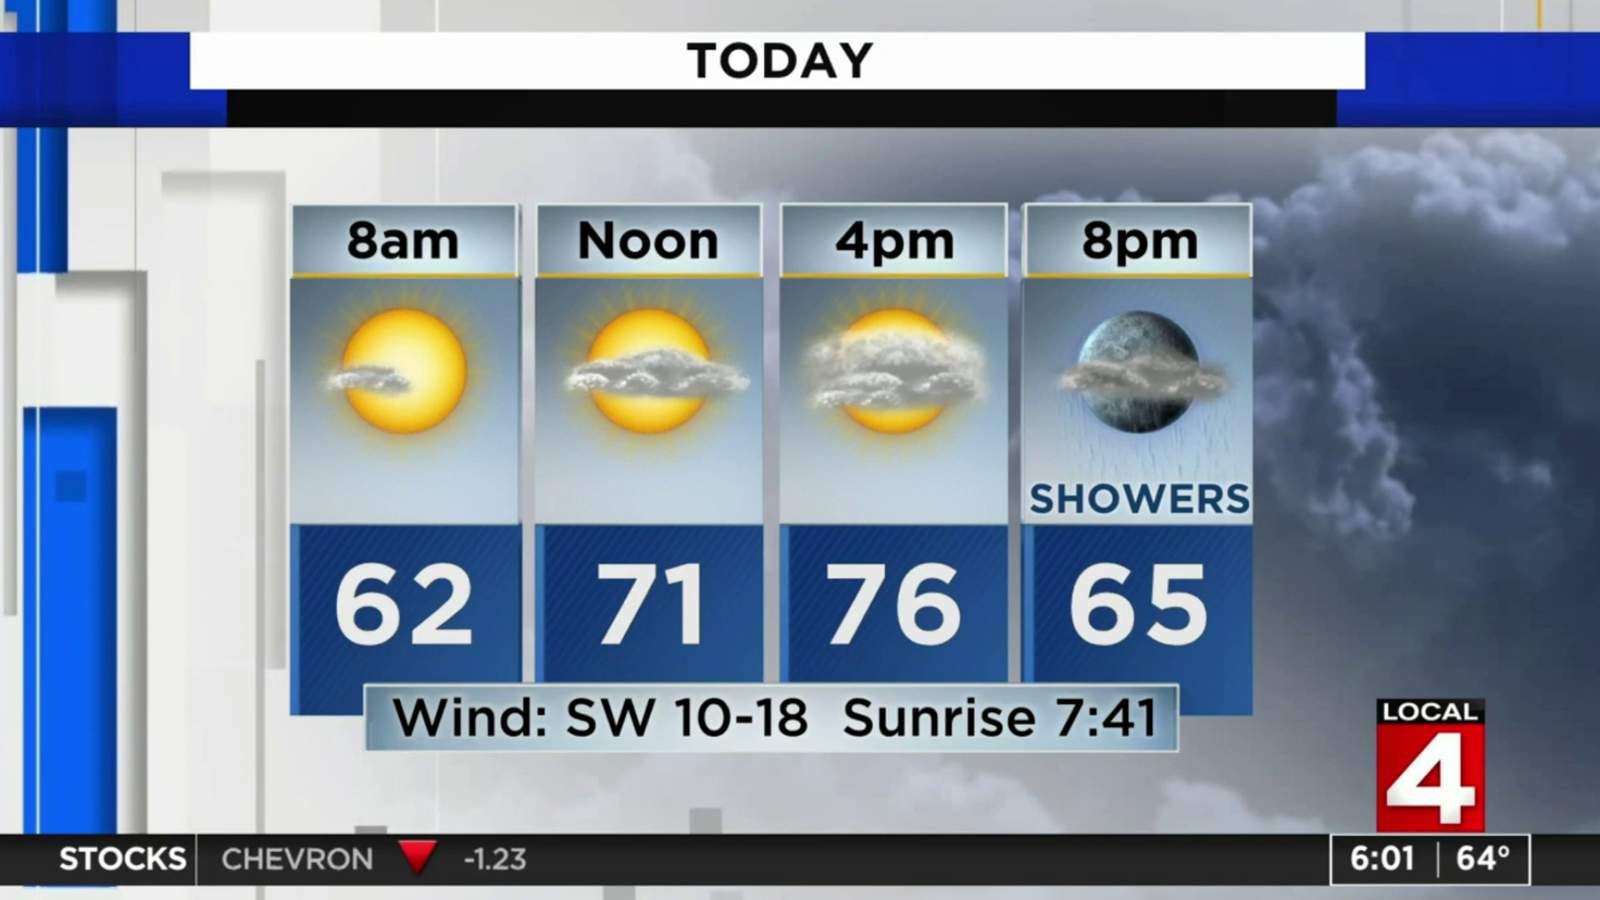 Metro Detroit weather: Saturday warms up with late scattered showers